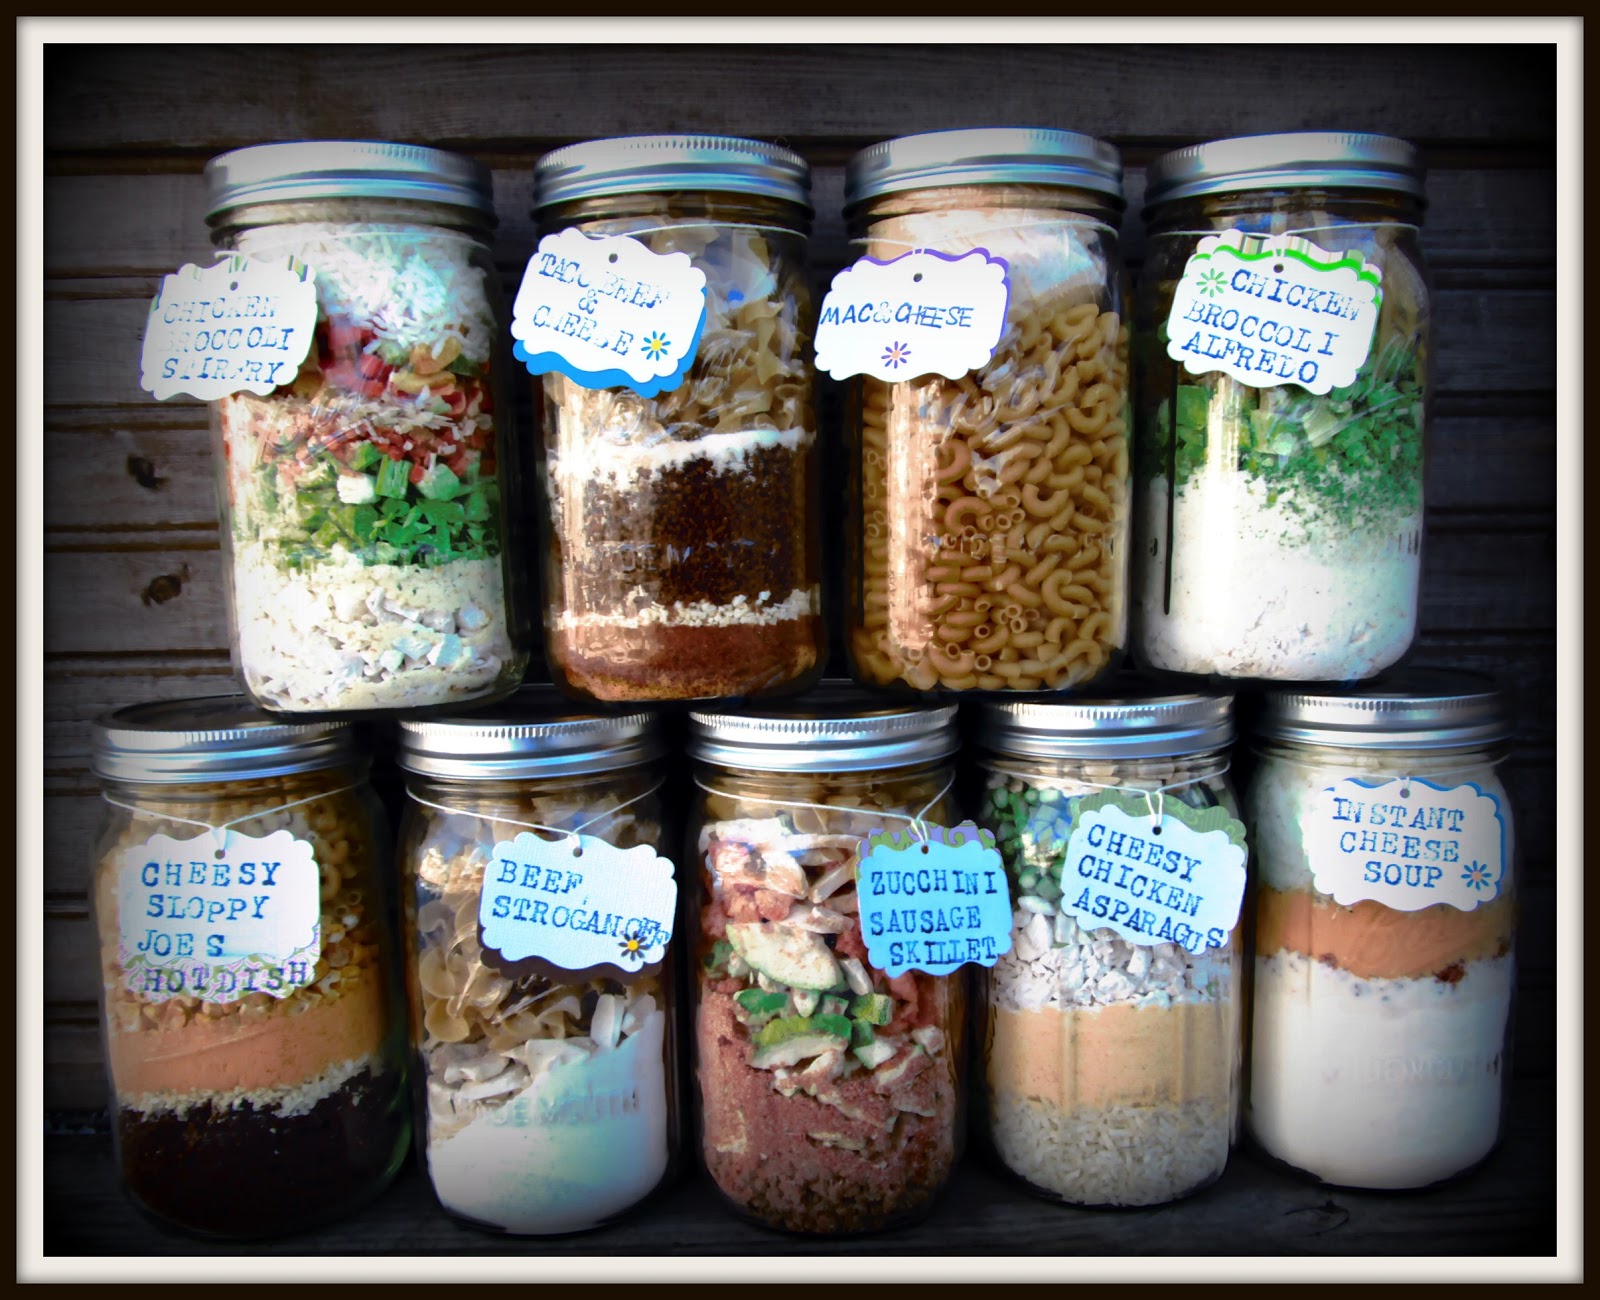 Rainy Day Food Storage: 3 Free Meal's In Jars Recipes